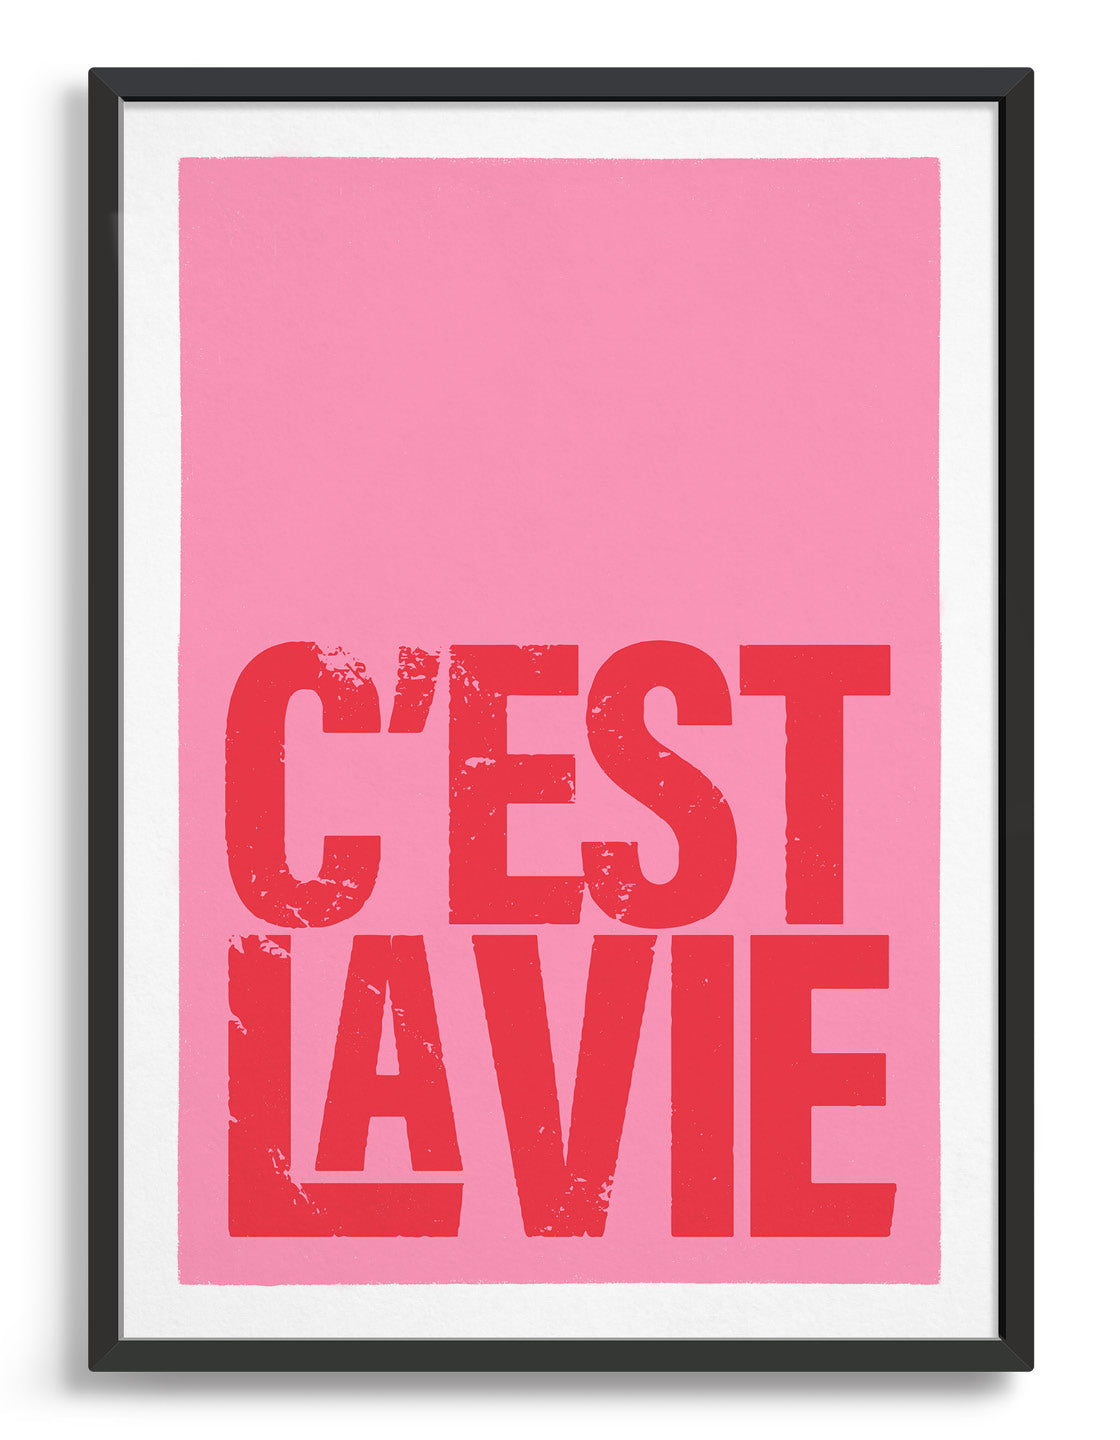 typography print with c'est la vie in red lettering at the bottom of a pink background